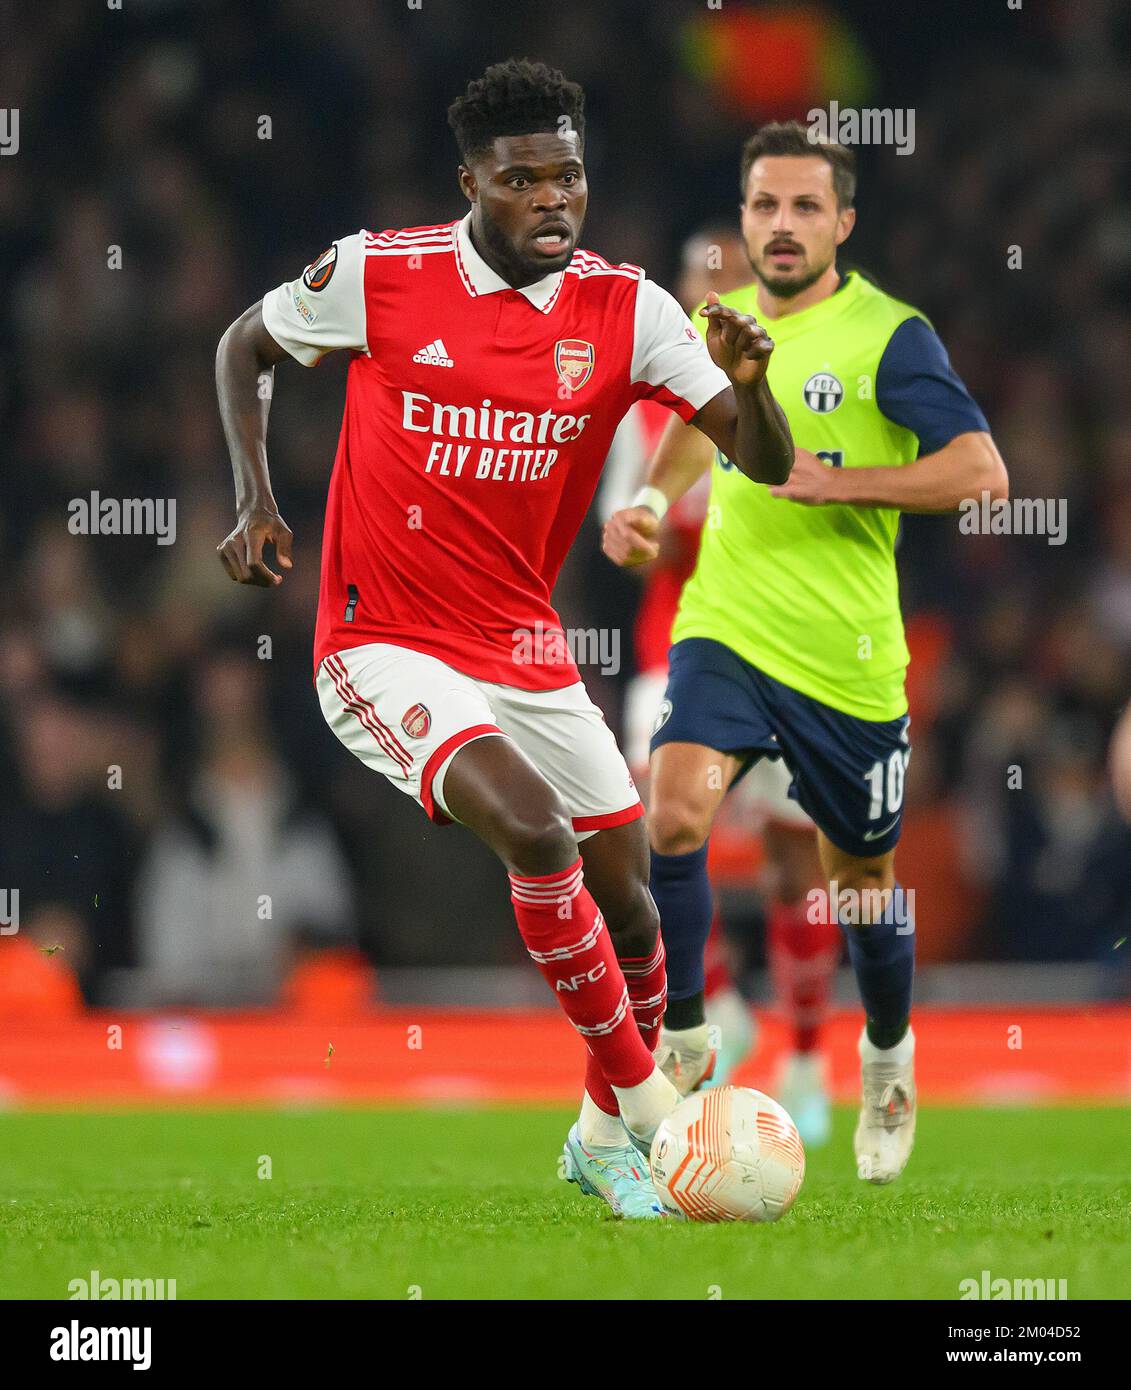 03 Nov 2022 - Arsenal v FC Zurich - UEFA Europa League - Group A - Emirates Stadium   Arsenal's Thomas Partey during the match against FC Zurich Picture : Mark Pain / Alamy Stock Photo